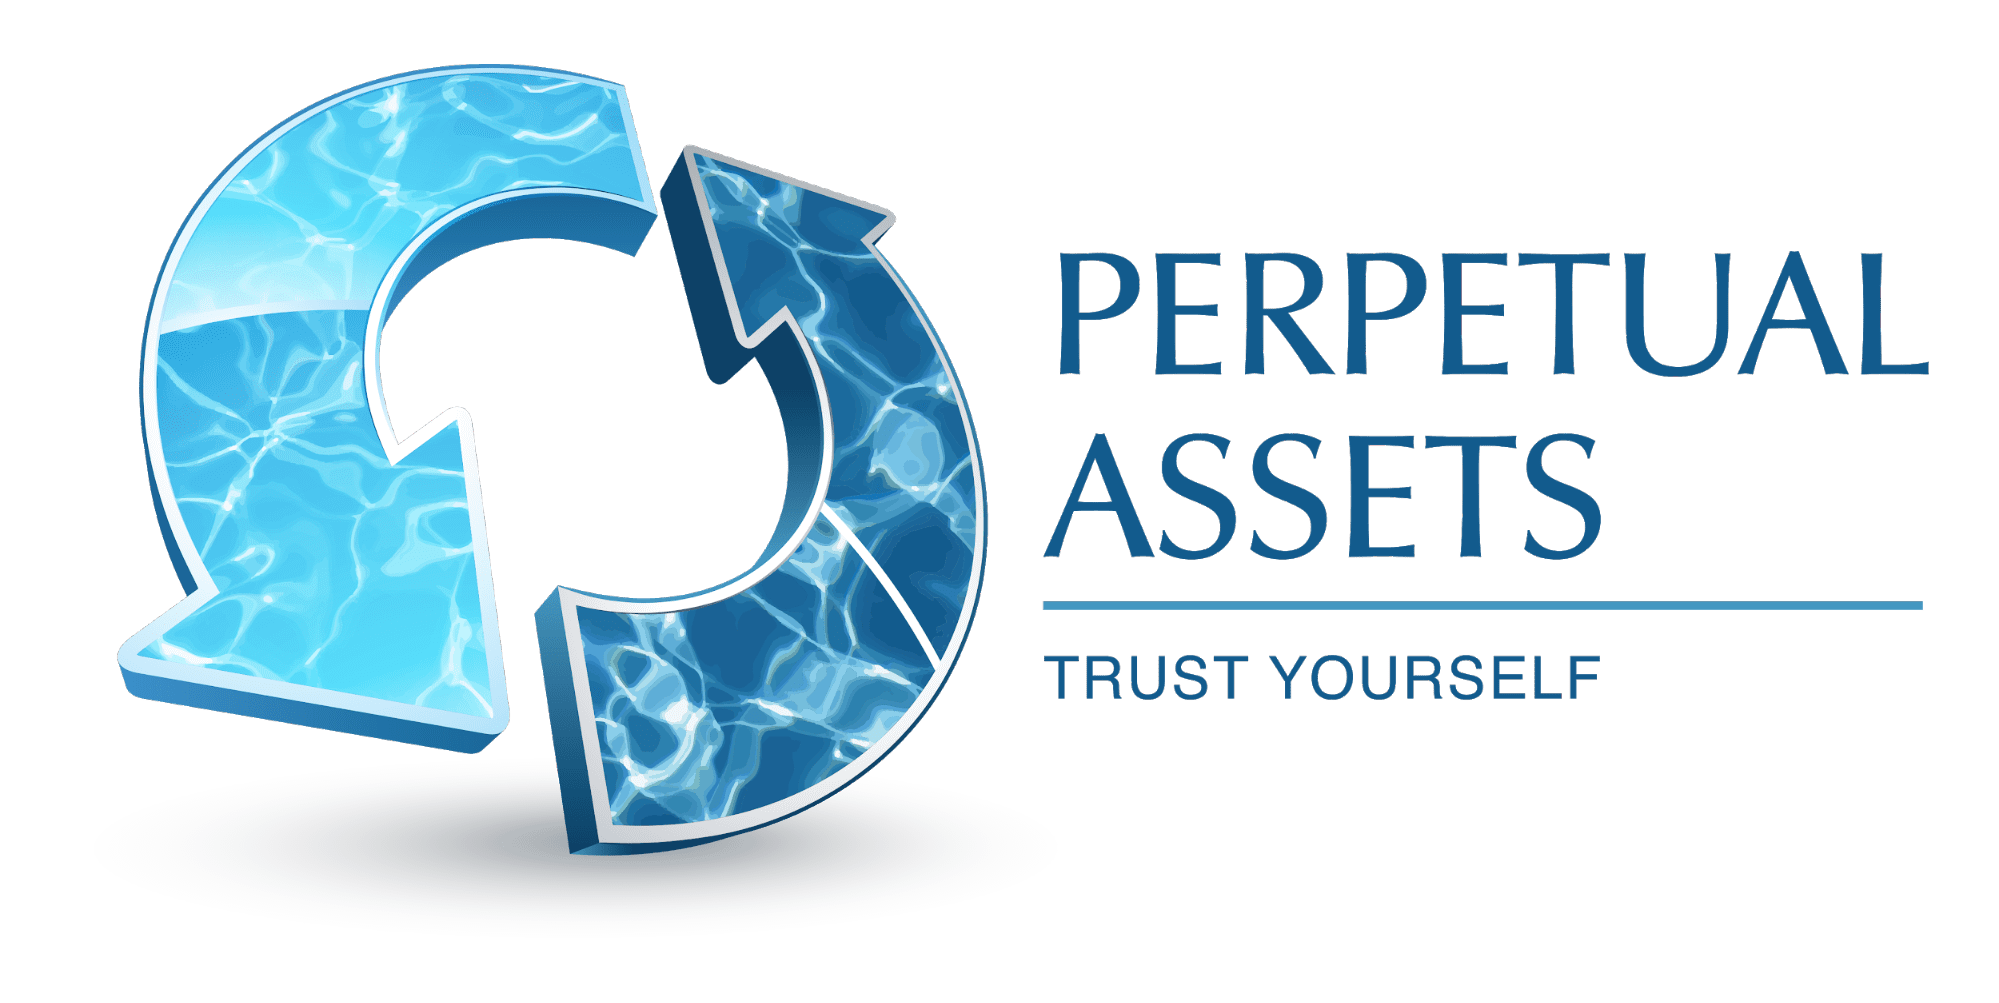 Perpetual Assets|image1